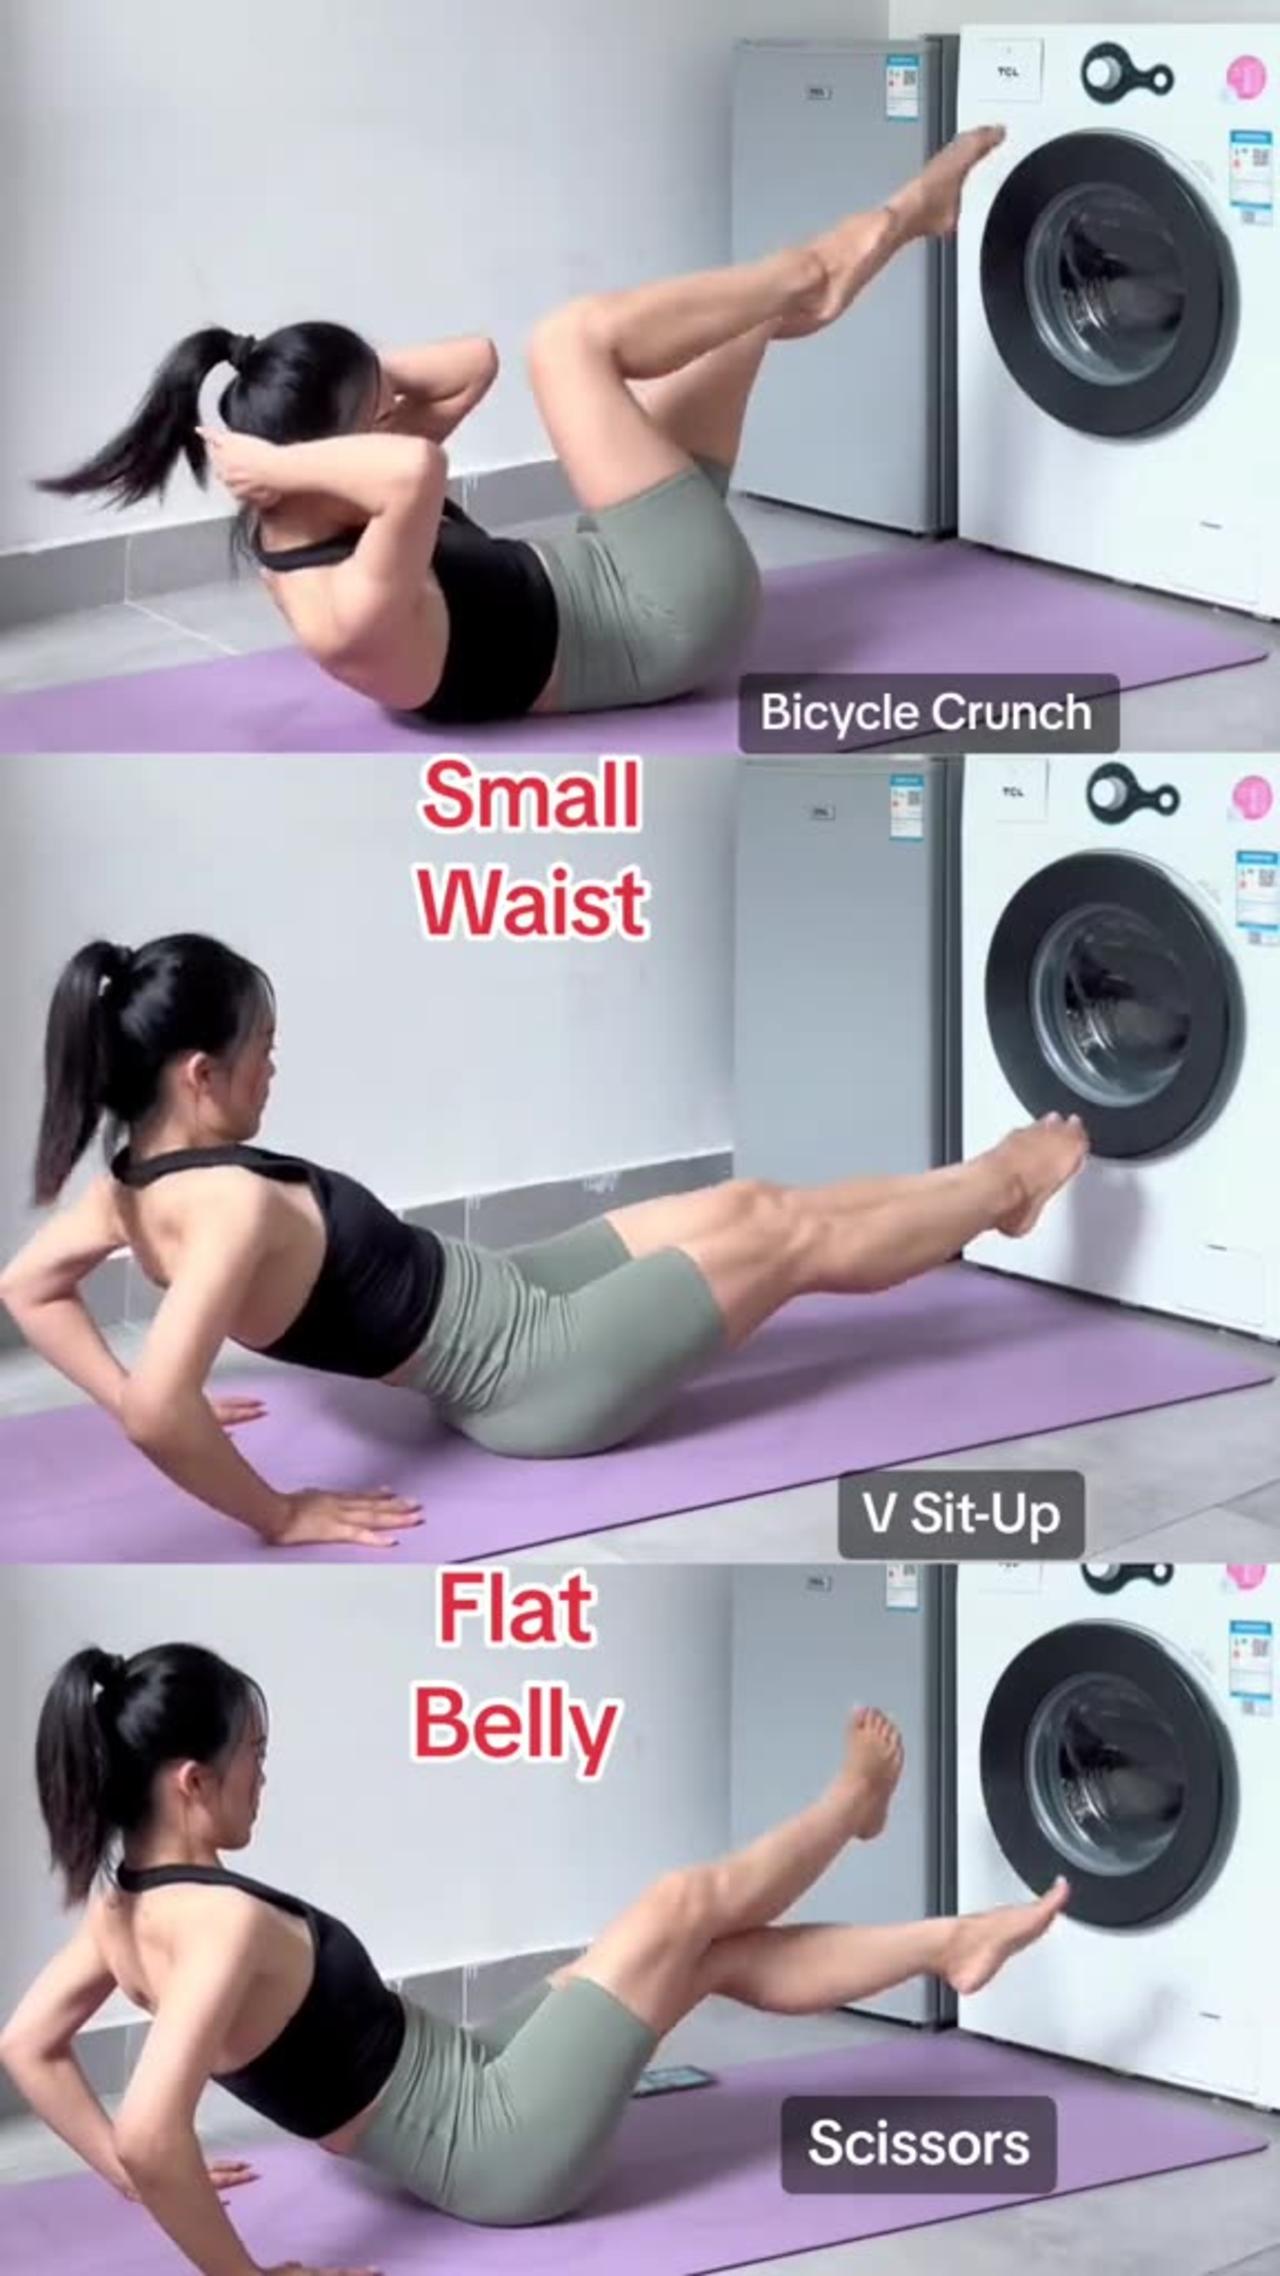 How to lose weight and burn belly fat easily